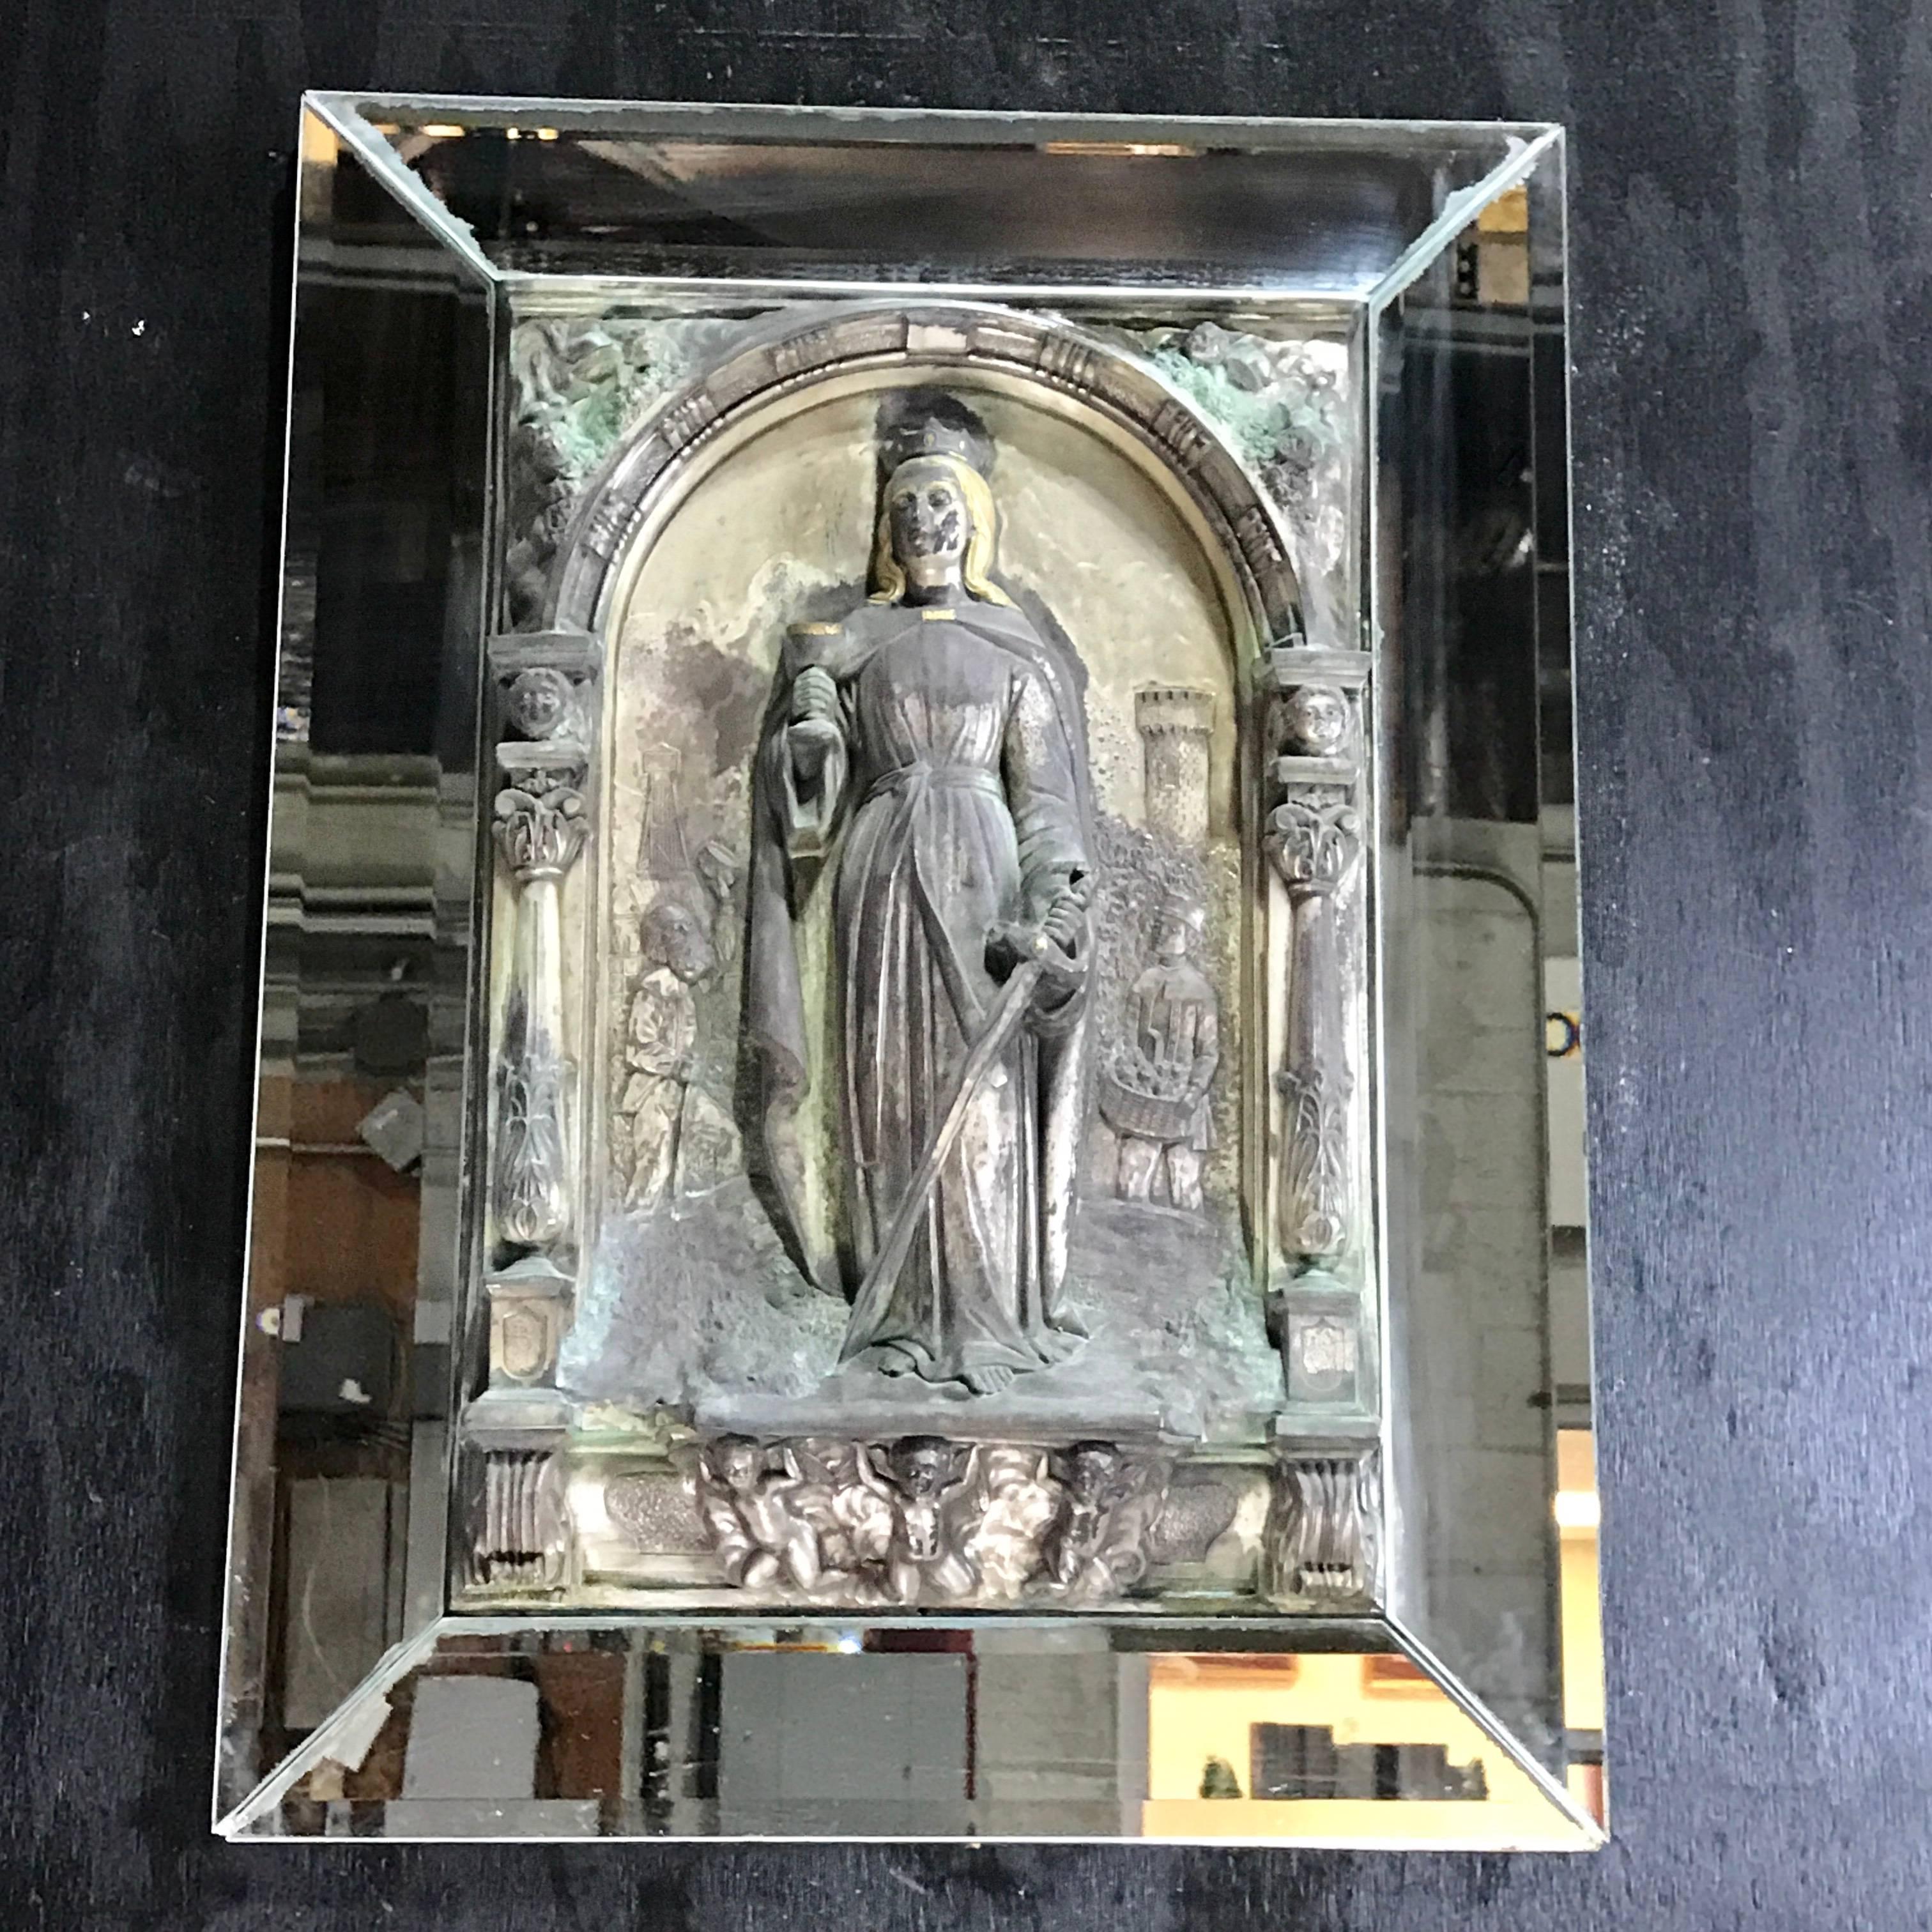 Antique Polychromed and Mirrored Relic of St. Barbara

Presenting an antique polychromed and mirrored relic of St. Barbara, bearing the mark of seasoned craftsmanship and ornate detailing. Retaining a distressed patina, the painted and polychromed